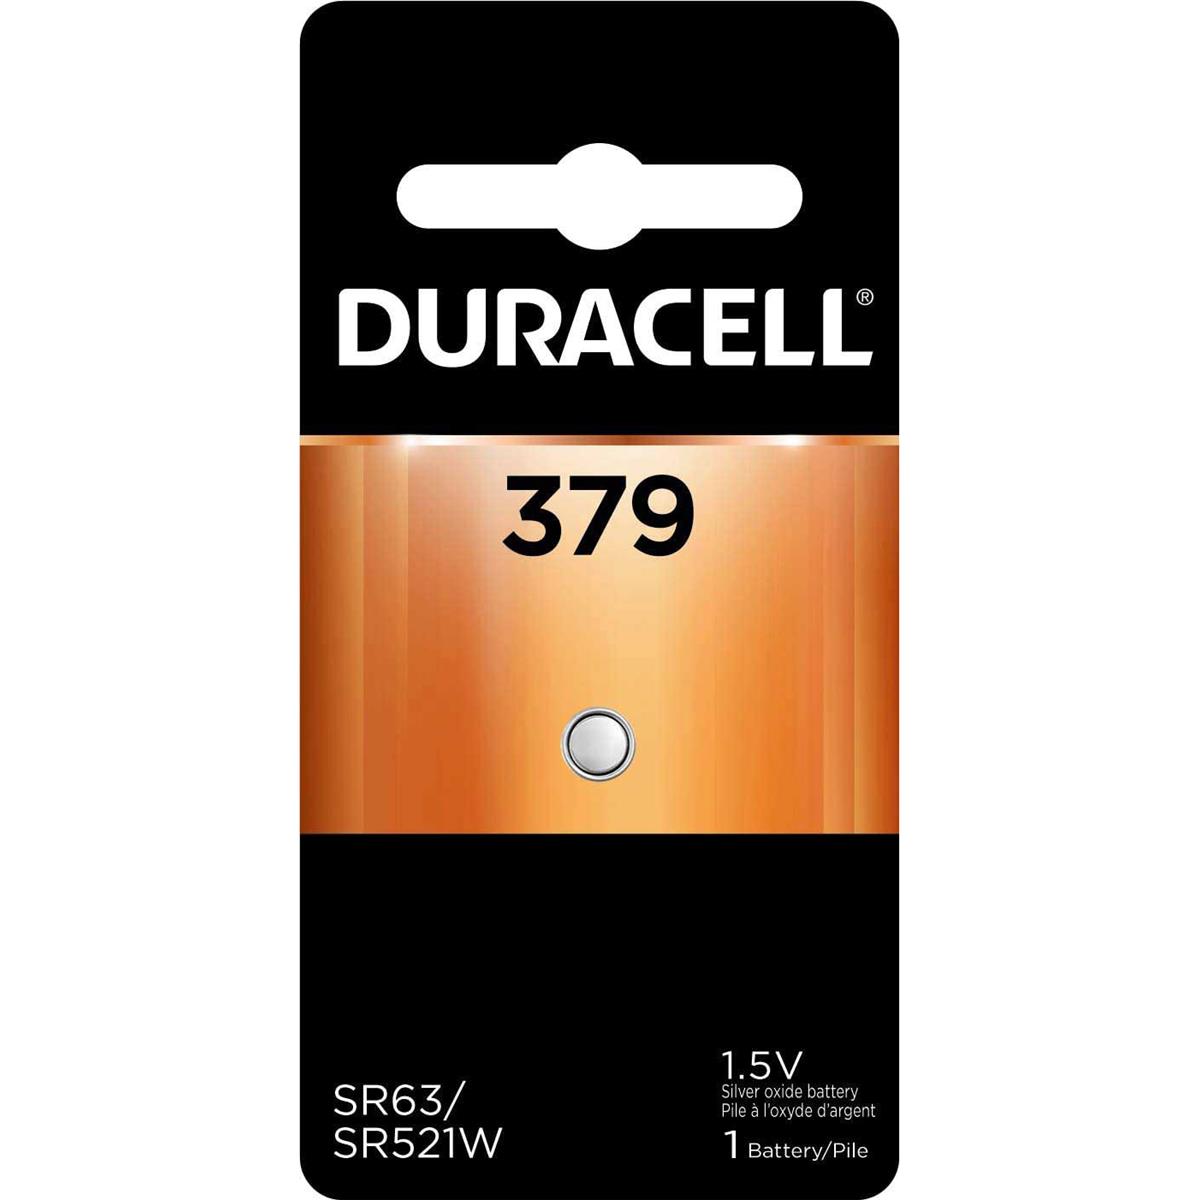 Image of Duracell D379 1.5V Silver Oxide Battery for Watch/Electronic